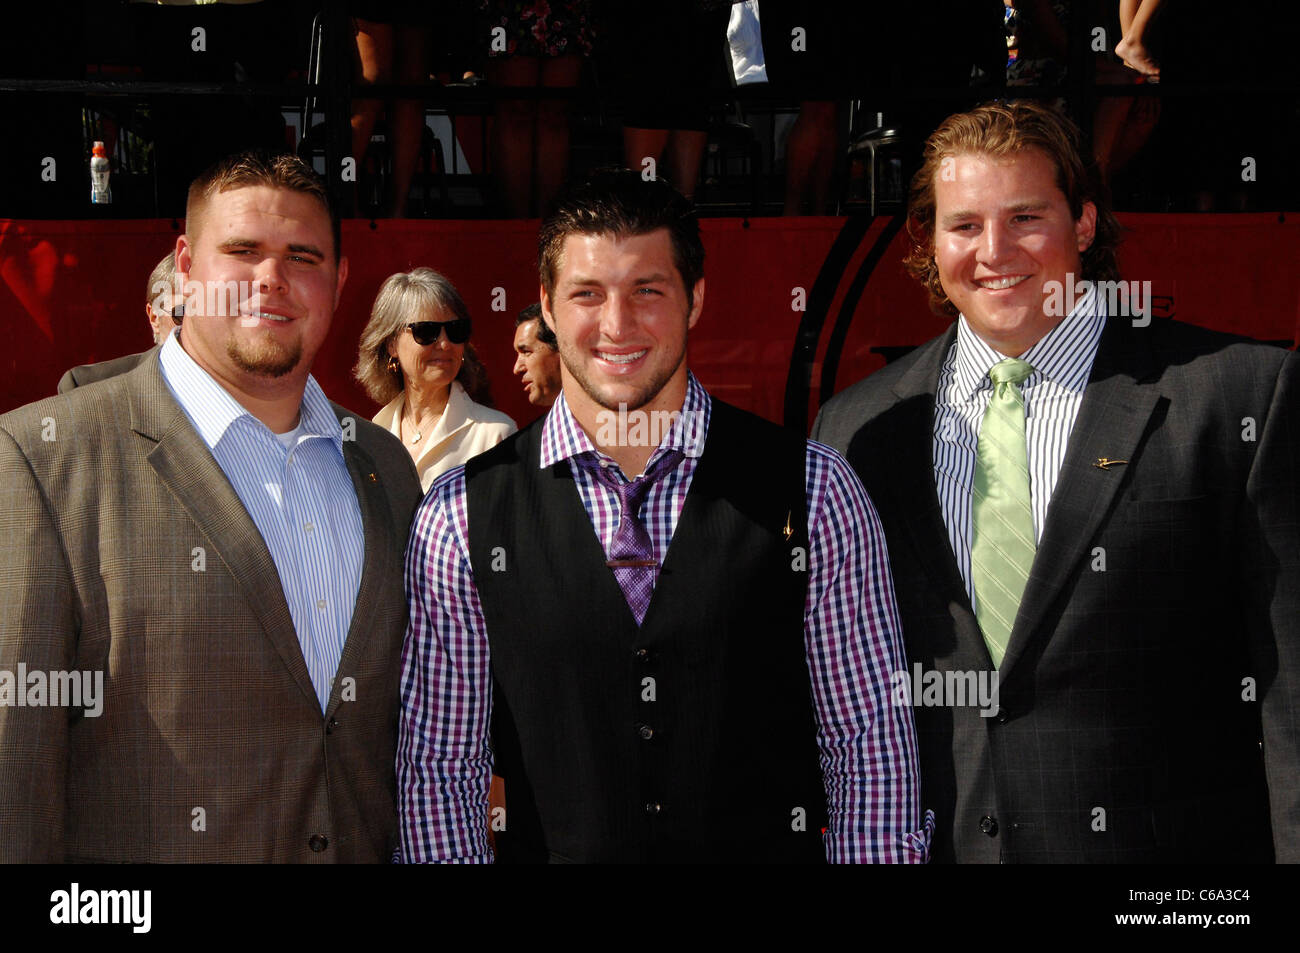 1 Robby Tebow Images, Stock Photos & Vectors